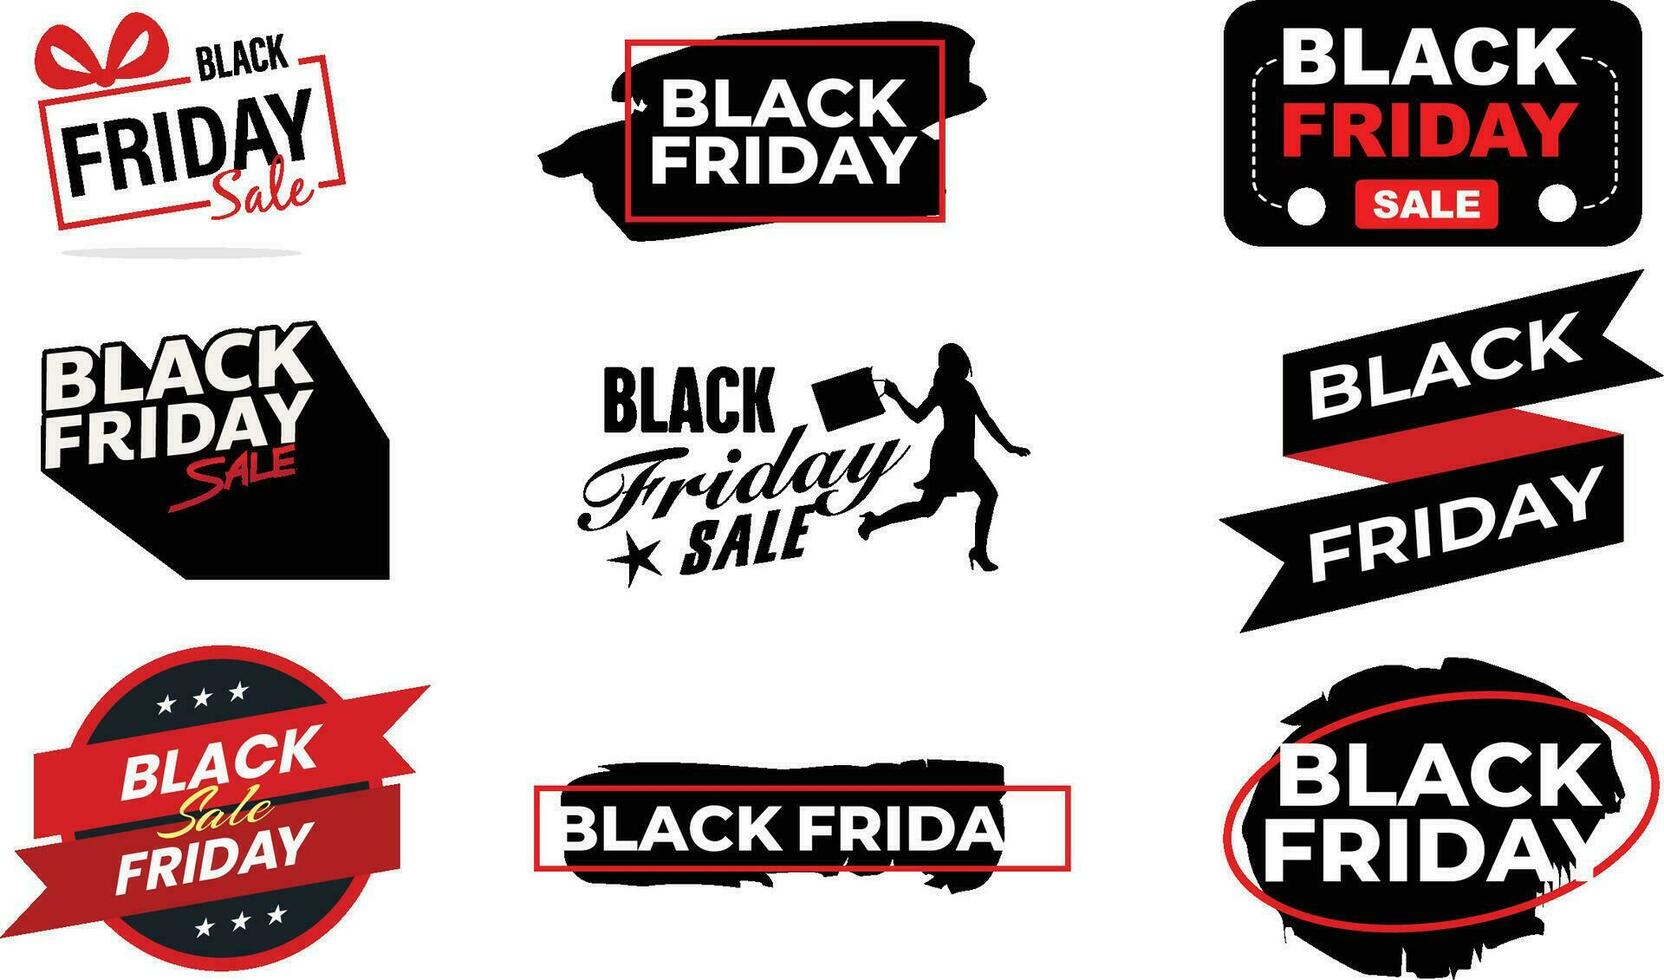 Black Friday Sale Banners Set vector